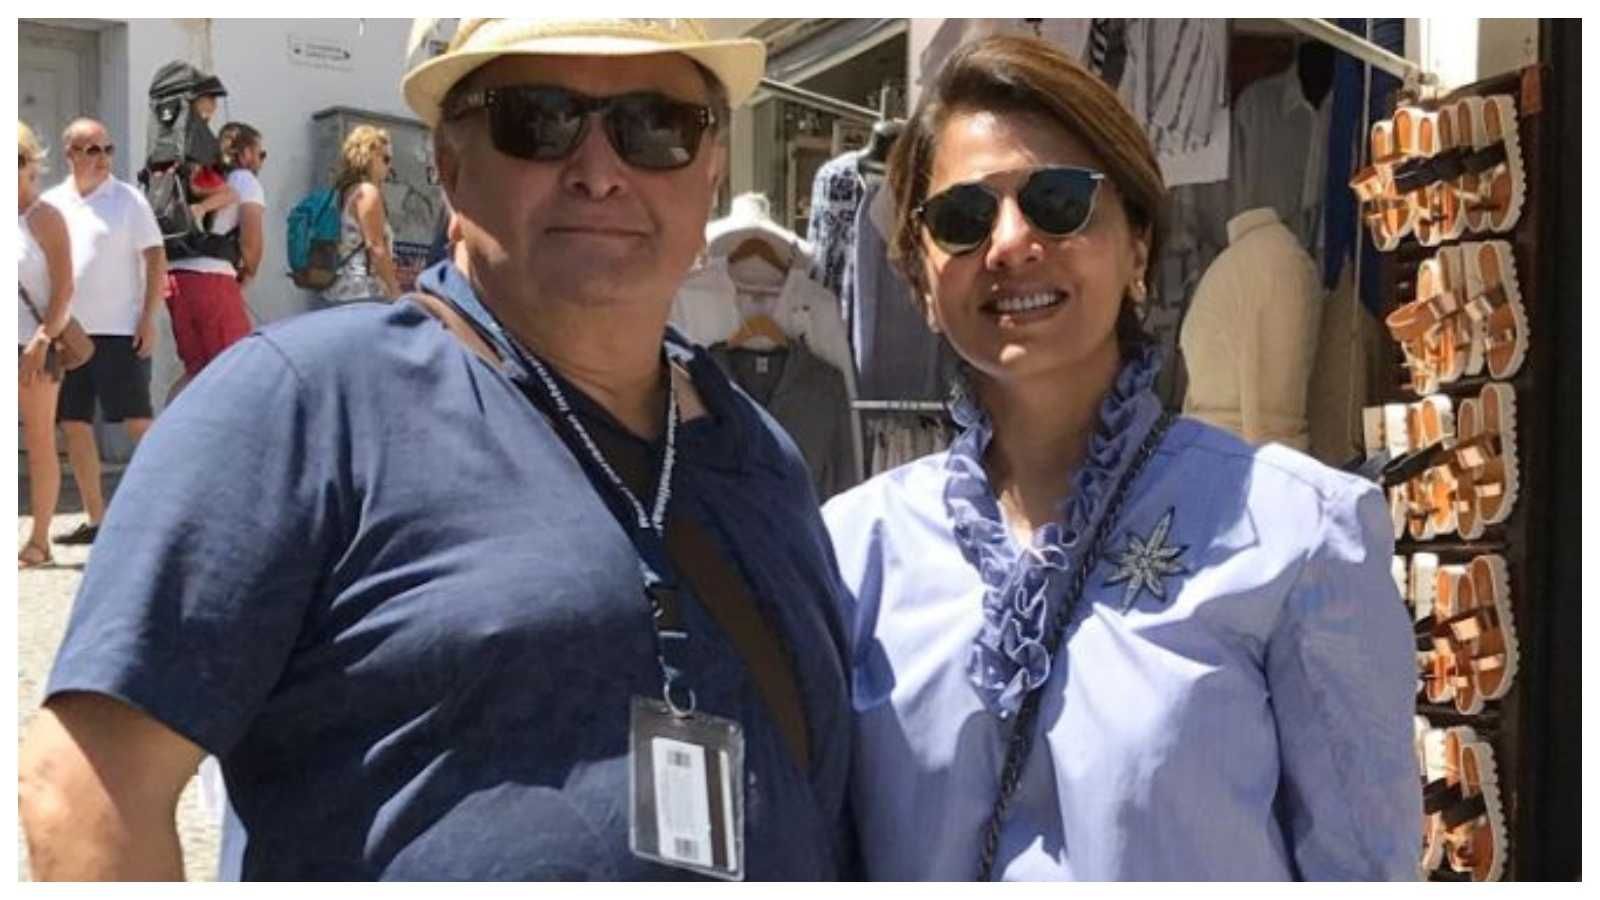 On Rishi Kapoor's 3rd death anniversary, Neetu Kapoor shares a heartwrenching post: 'You are missed everyday'